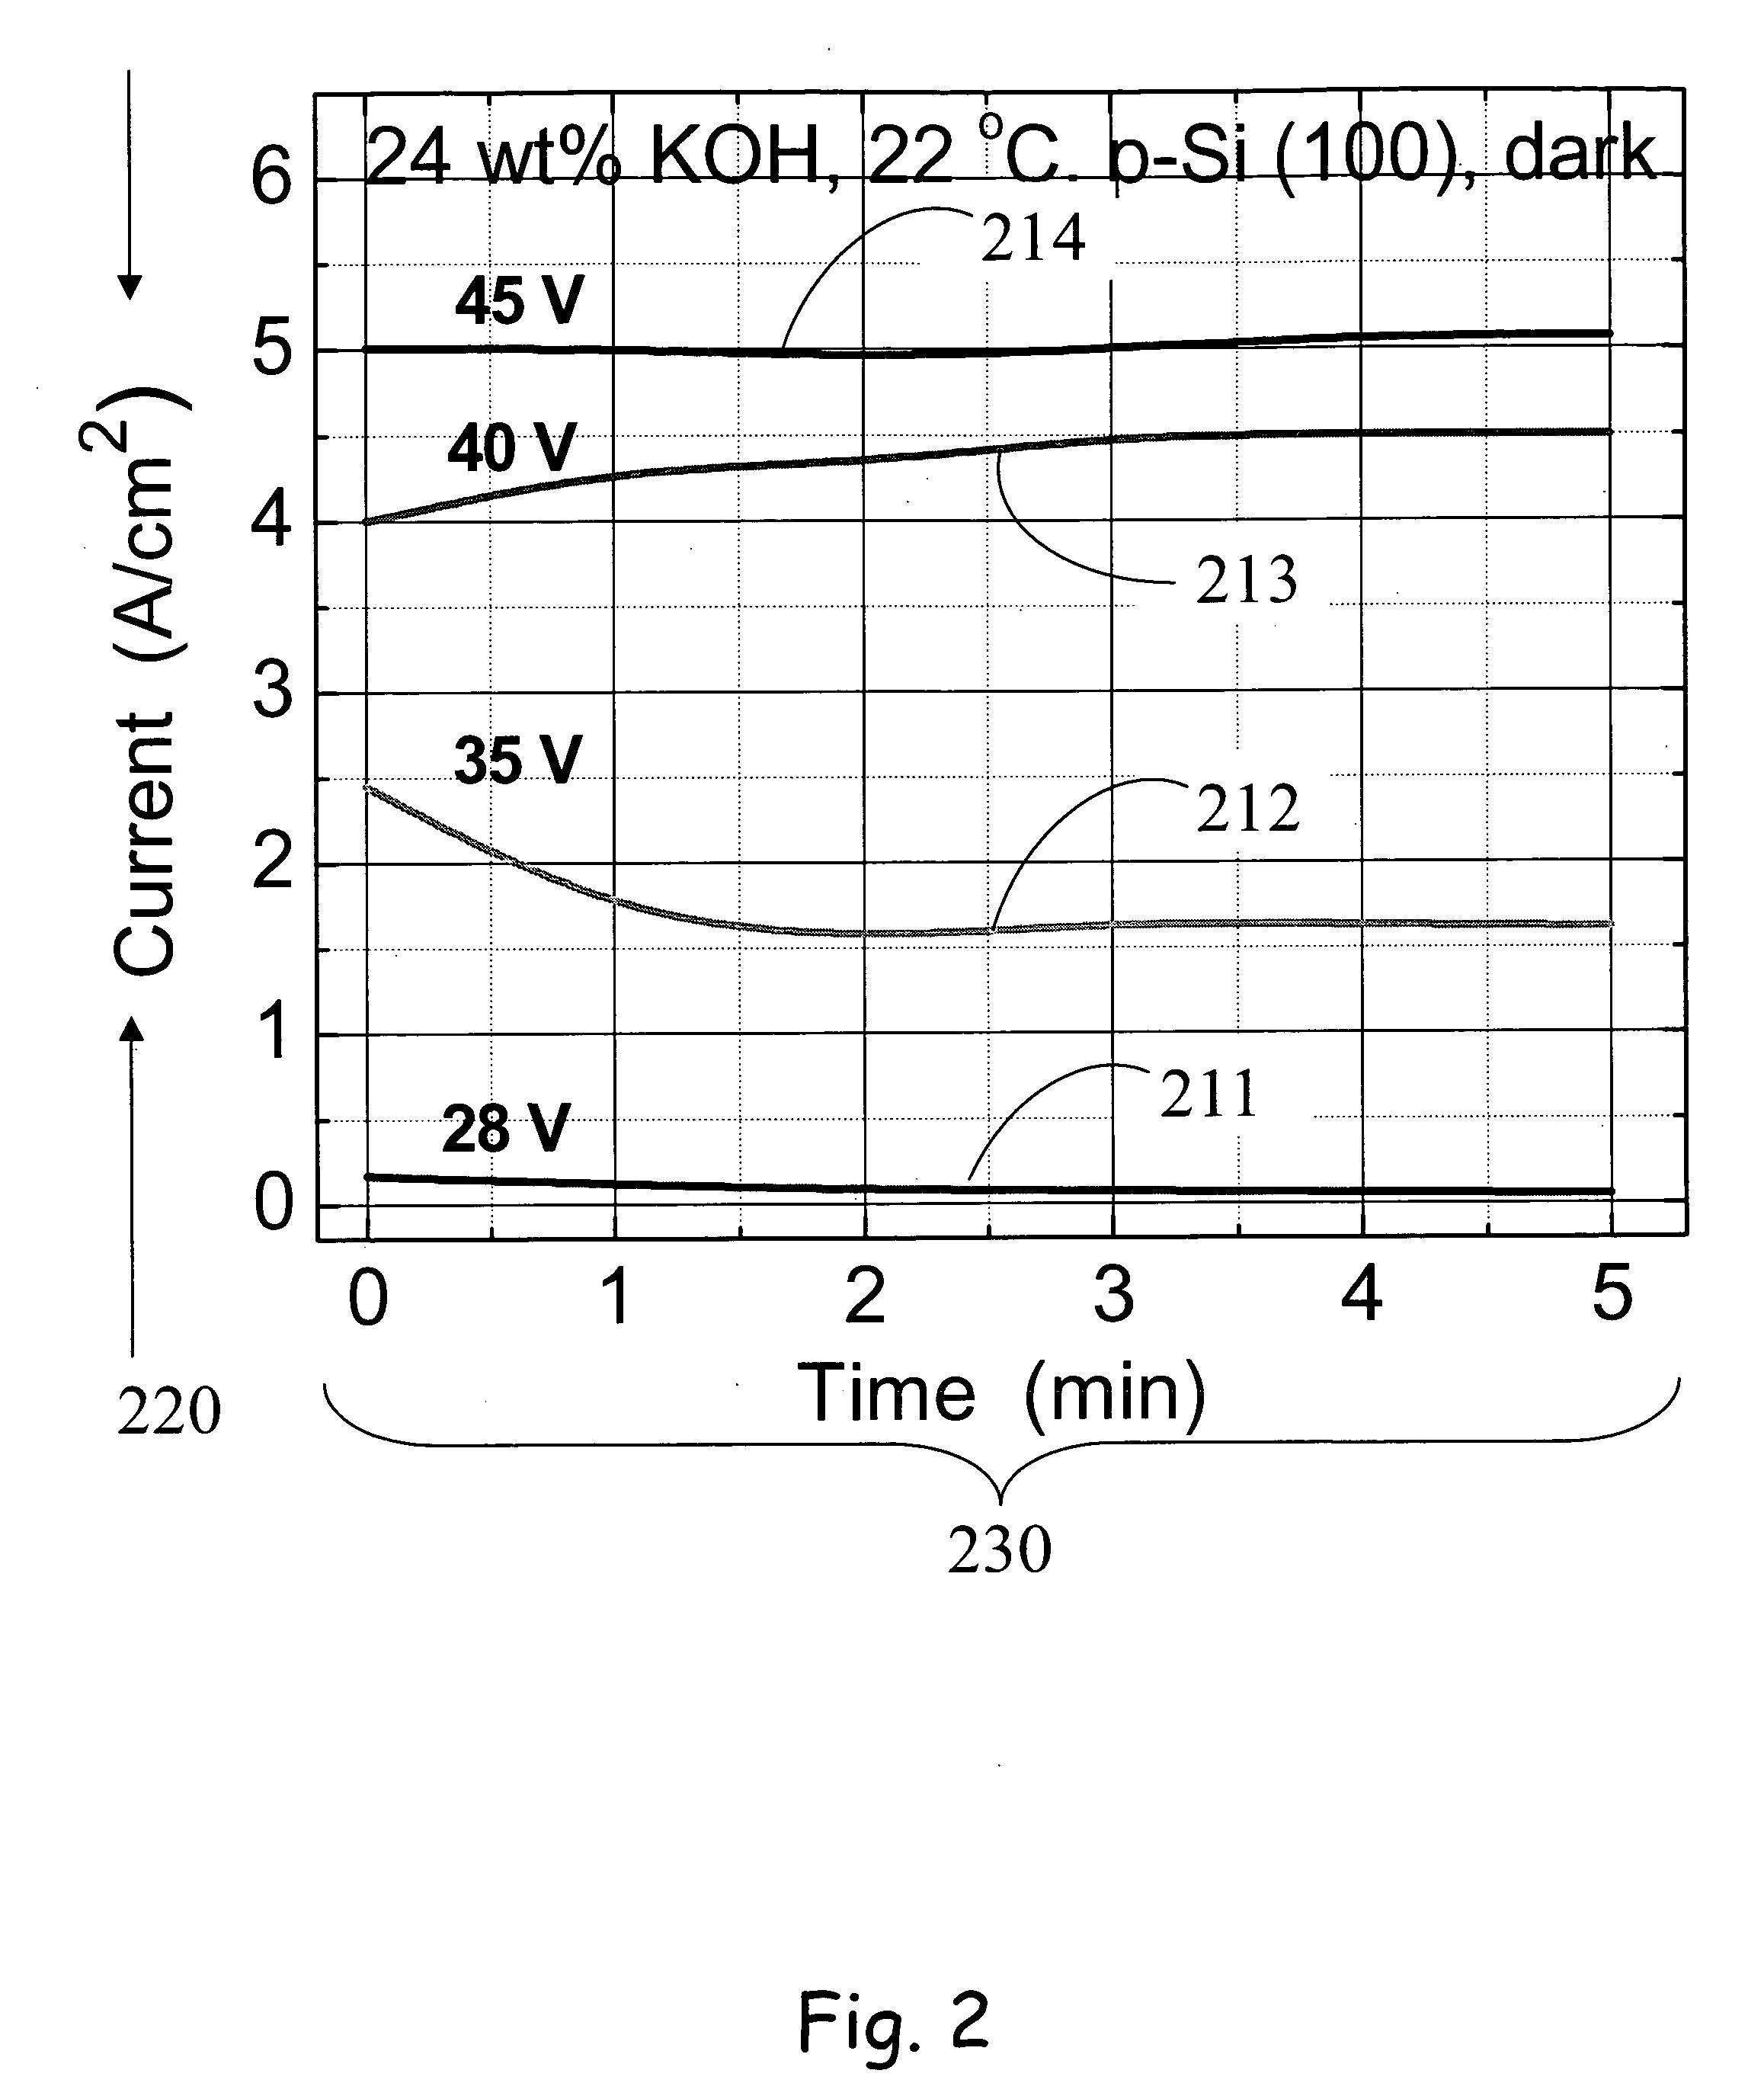 Method for electrochemical etching of semiconductor material using positive potential dissolution (PPD) in HF-free solutions